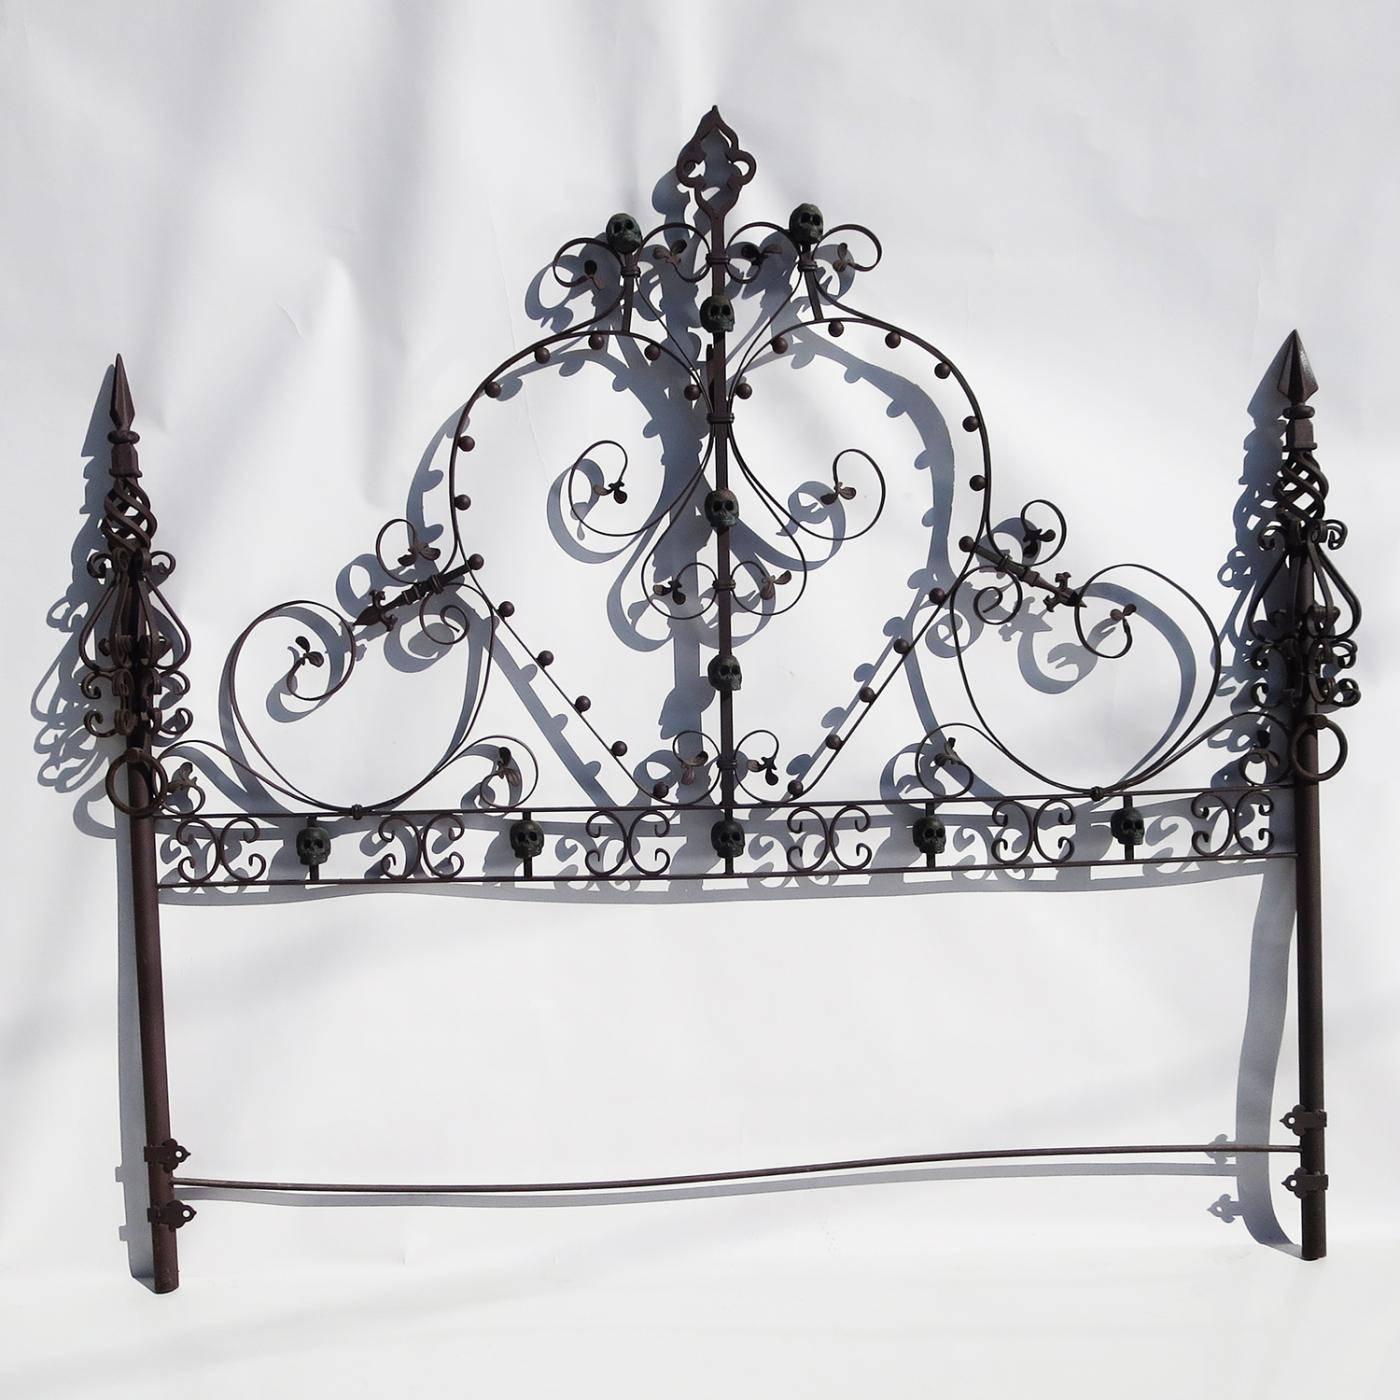 RETIREMENT SALE!!!  EVERYTHING MUST GO - CHECK OUT OUR OTHER ITEMS.				

A wonderfully crafted headboard and footboard in elaborate wrought iron, in a king-size. The bed features a motif of green patinated bronze skulls on both pieces. There are